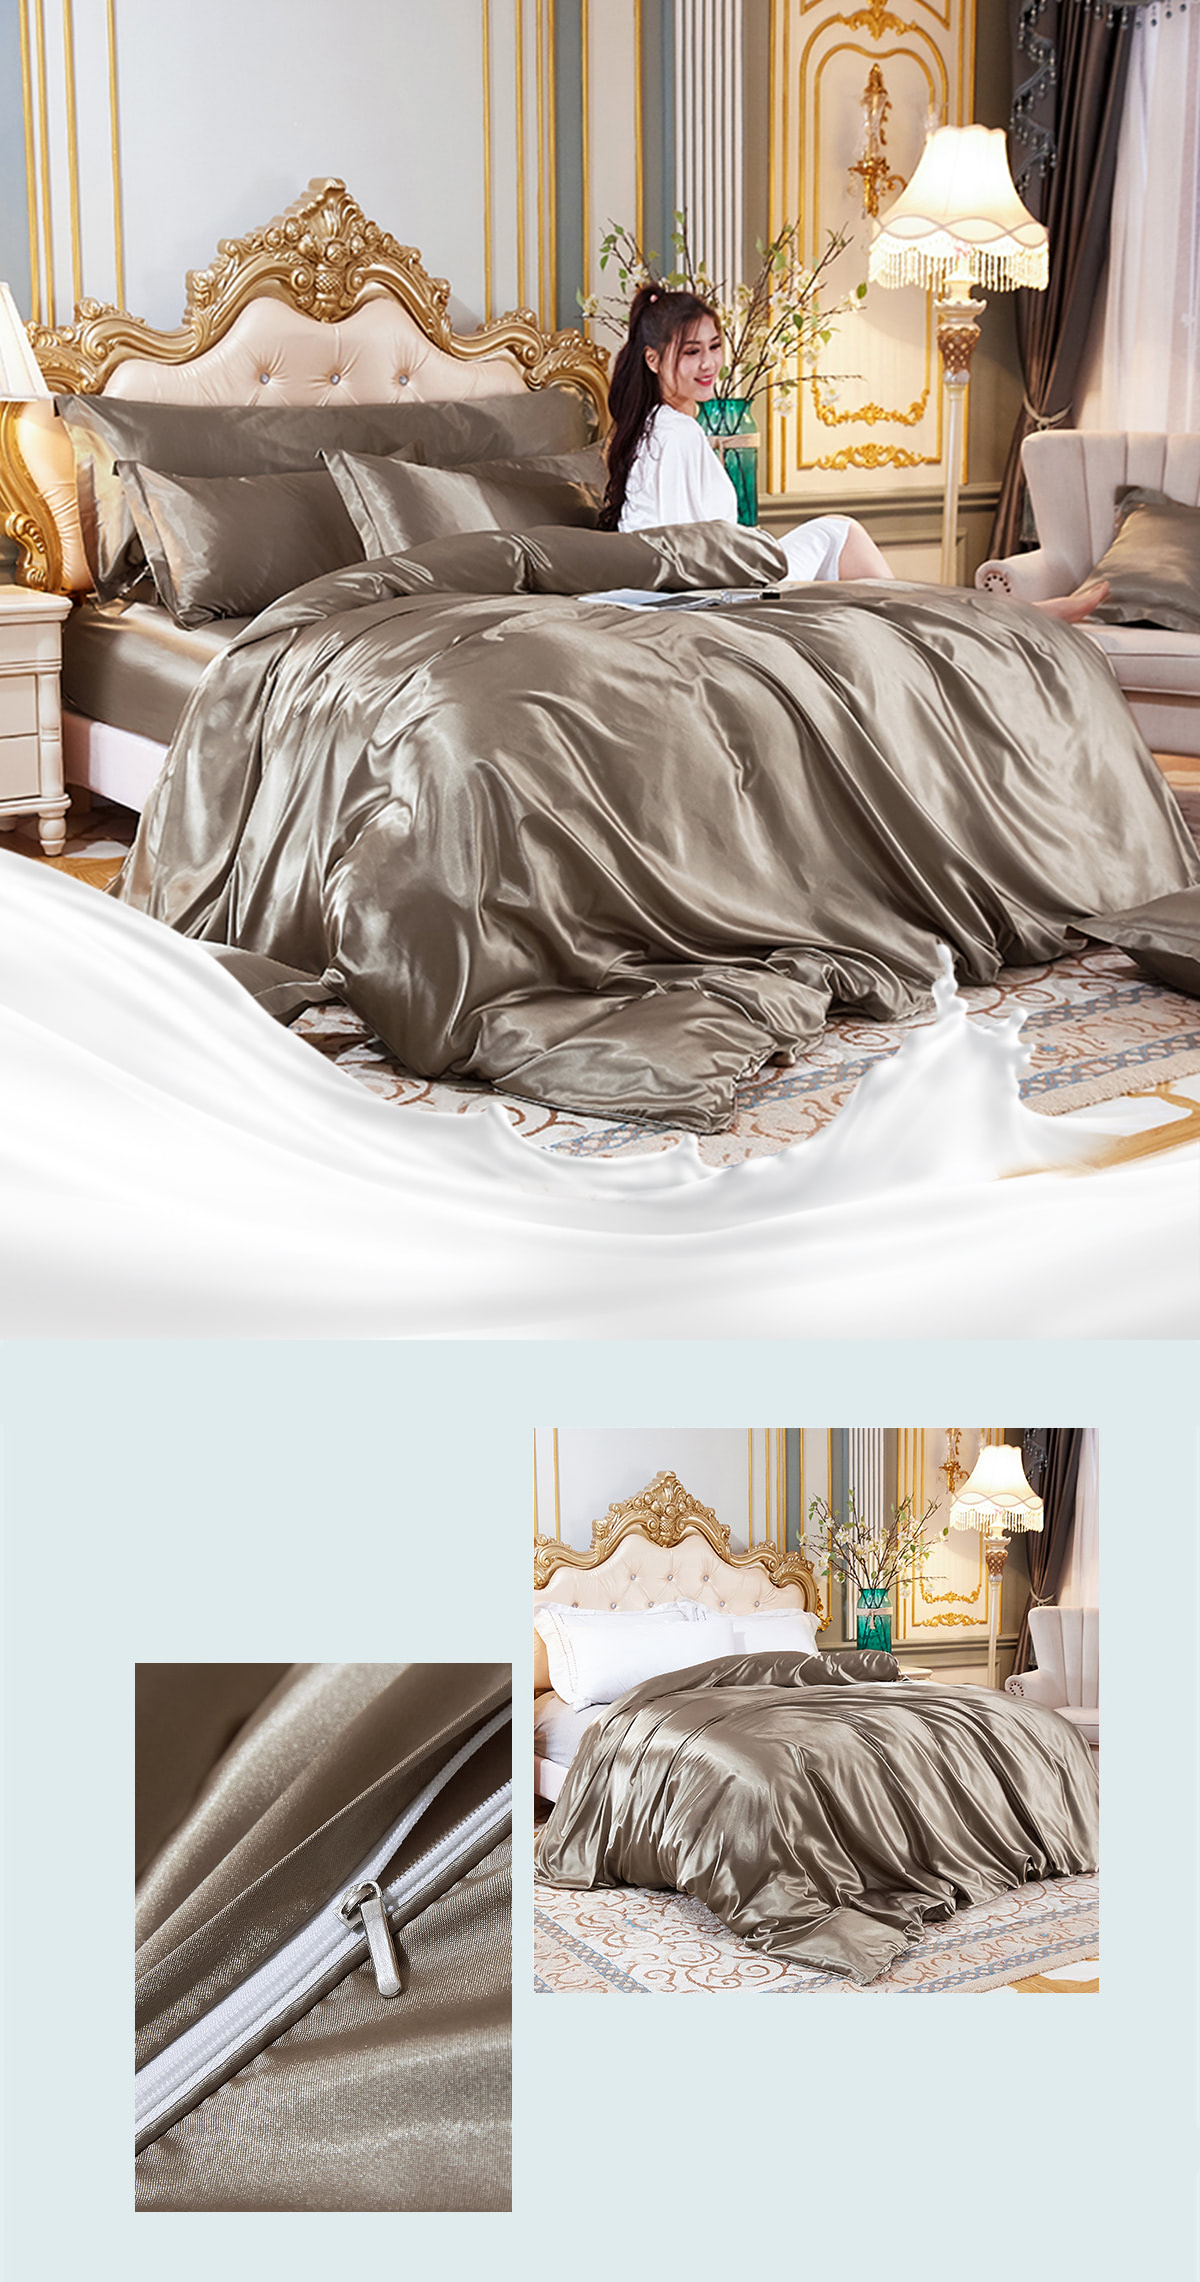 4-Piece-Soft-Silky-Satin-Solid-Color-Bed-Sheet-Pillowcases-Set19.jpg